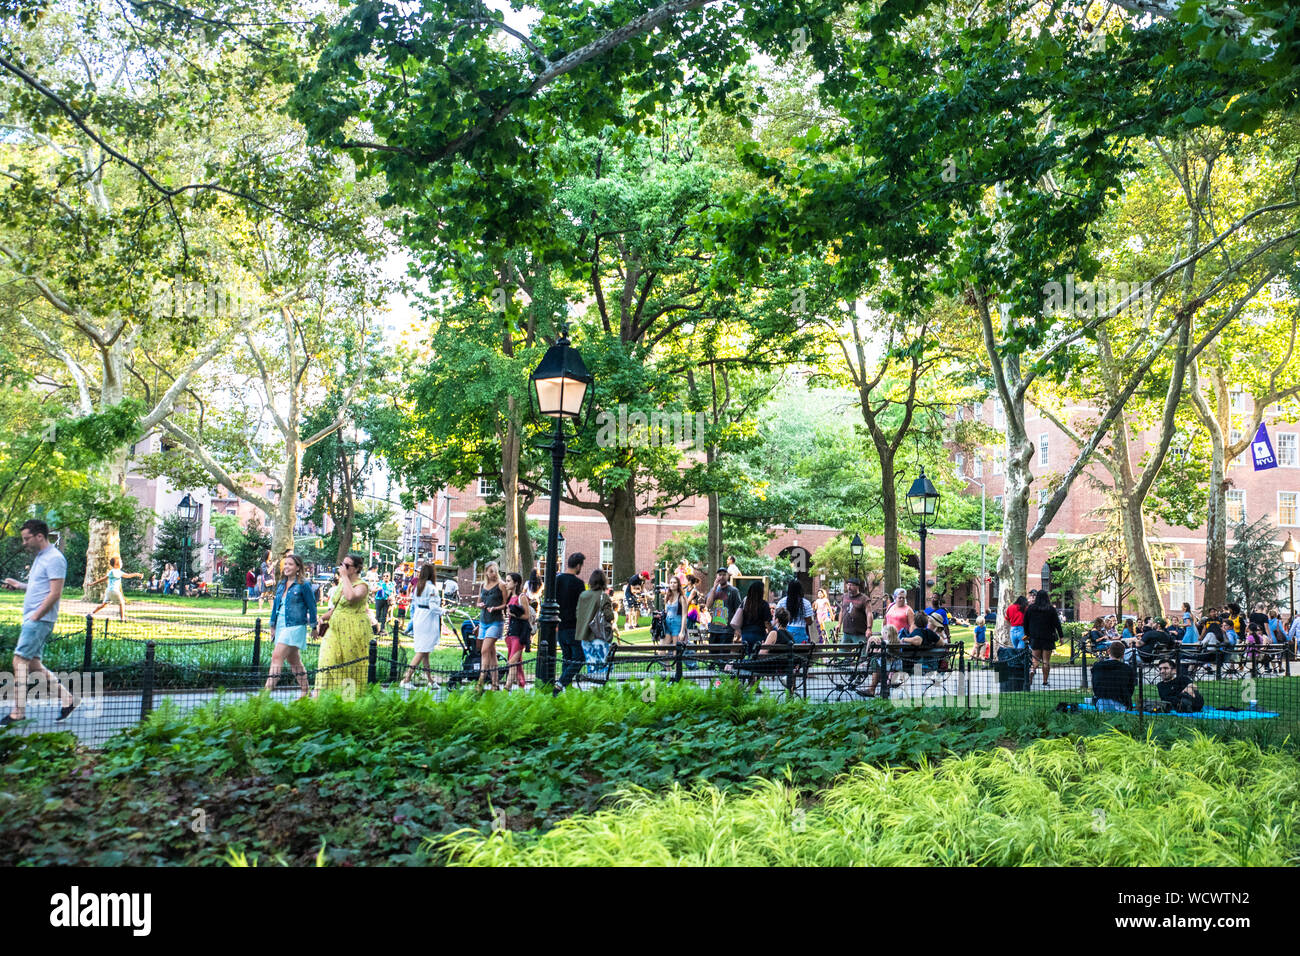 NEW YORK CITY - AUGUST 24, 2019:  View from Washington Square Park in Greenwich Village Manhattan on a summer afternoon.  People and NYU are visible. Stock Photo